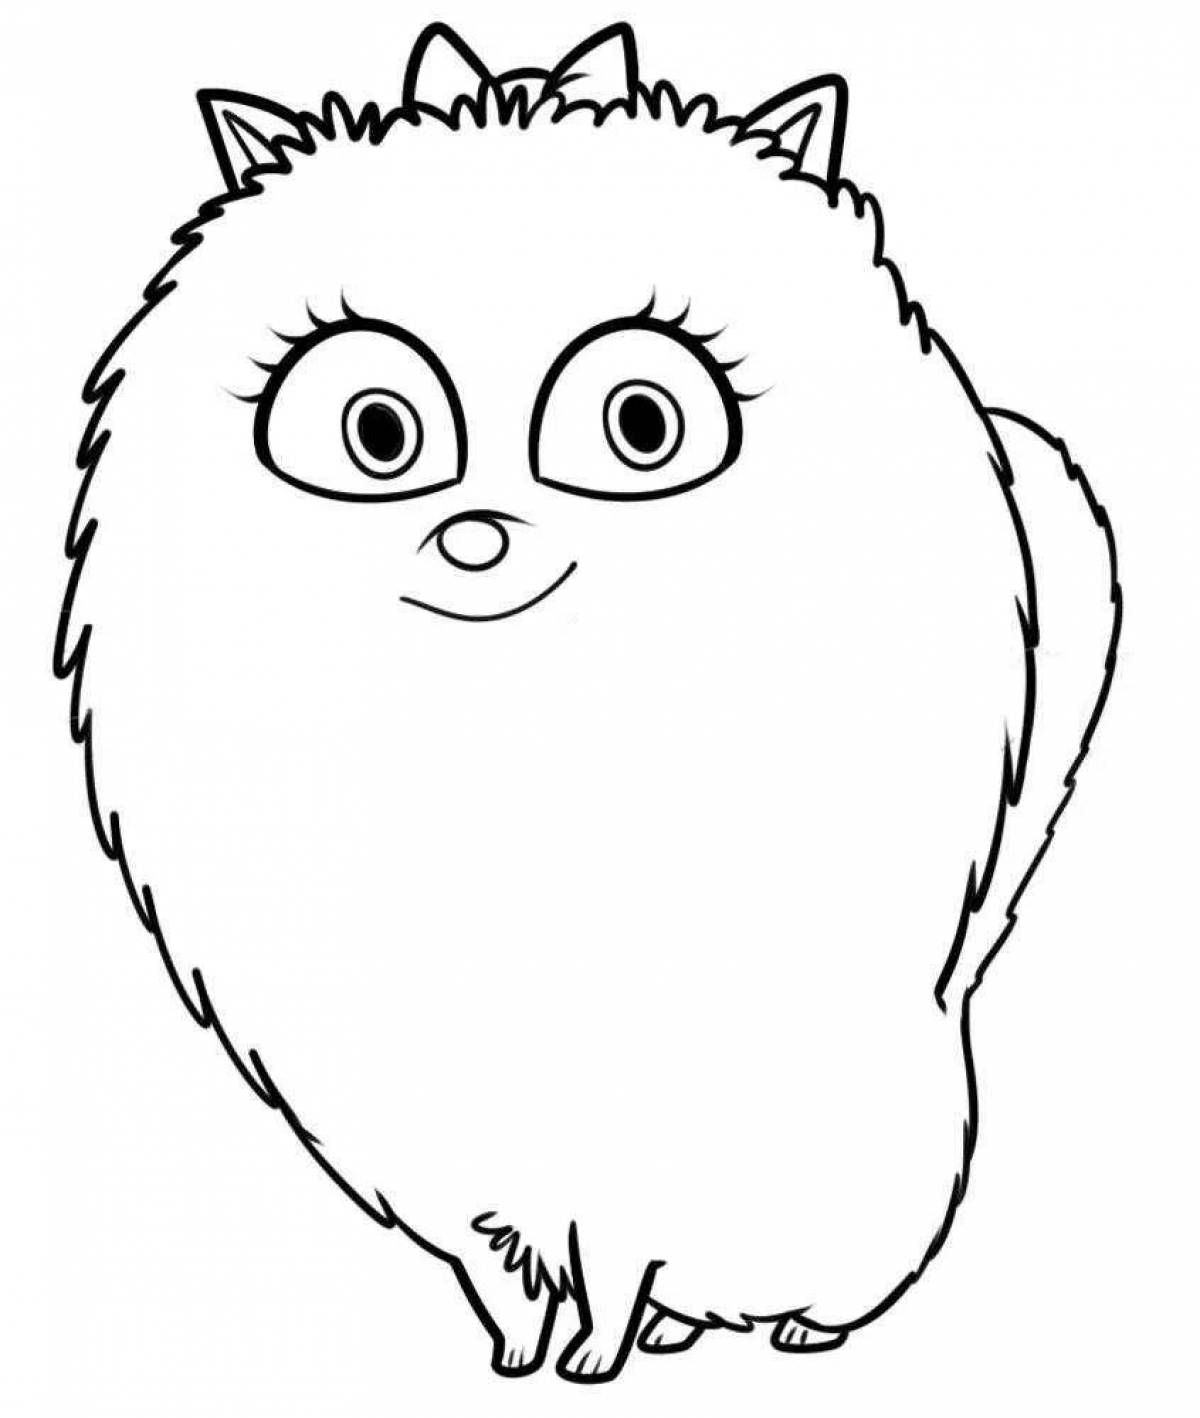 Coloring page glowing fluffy spy